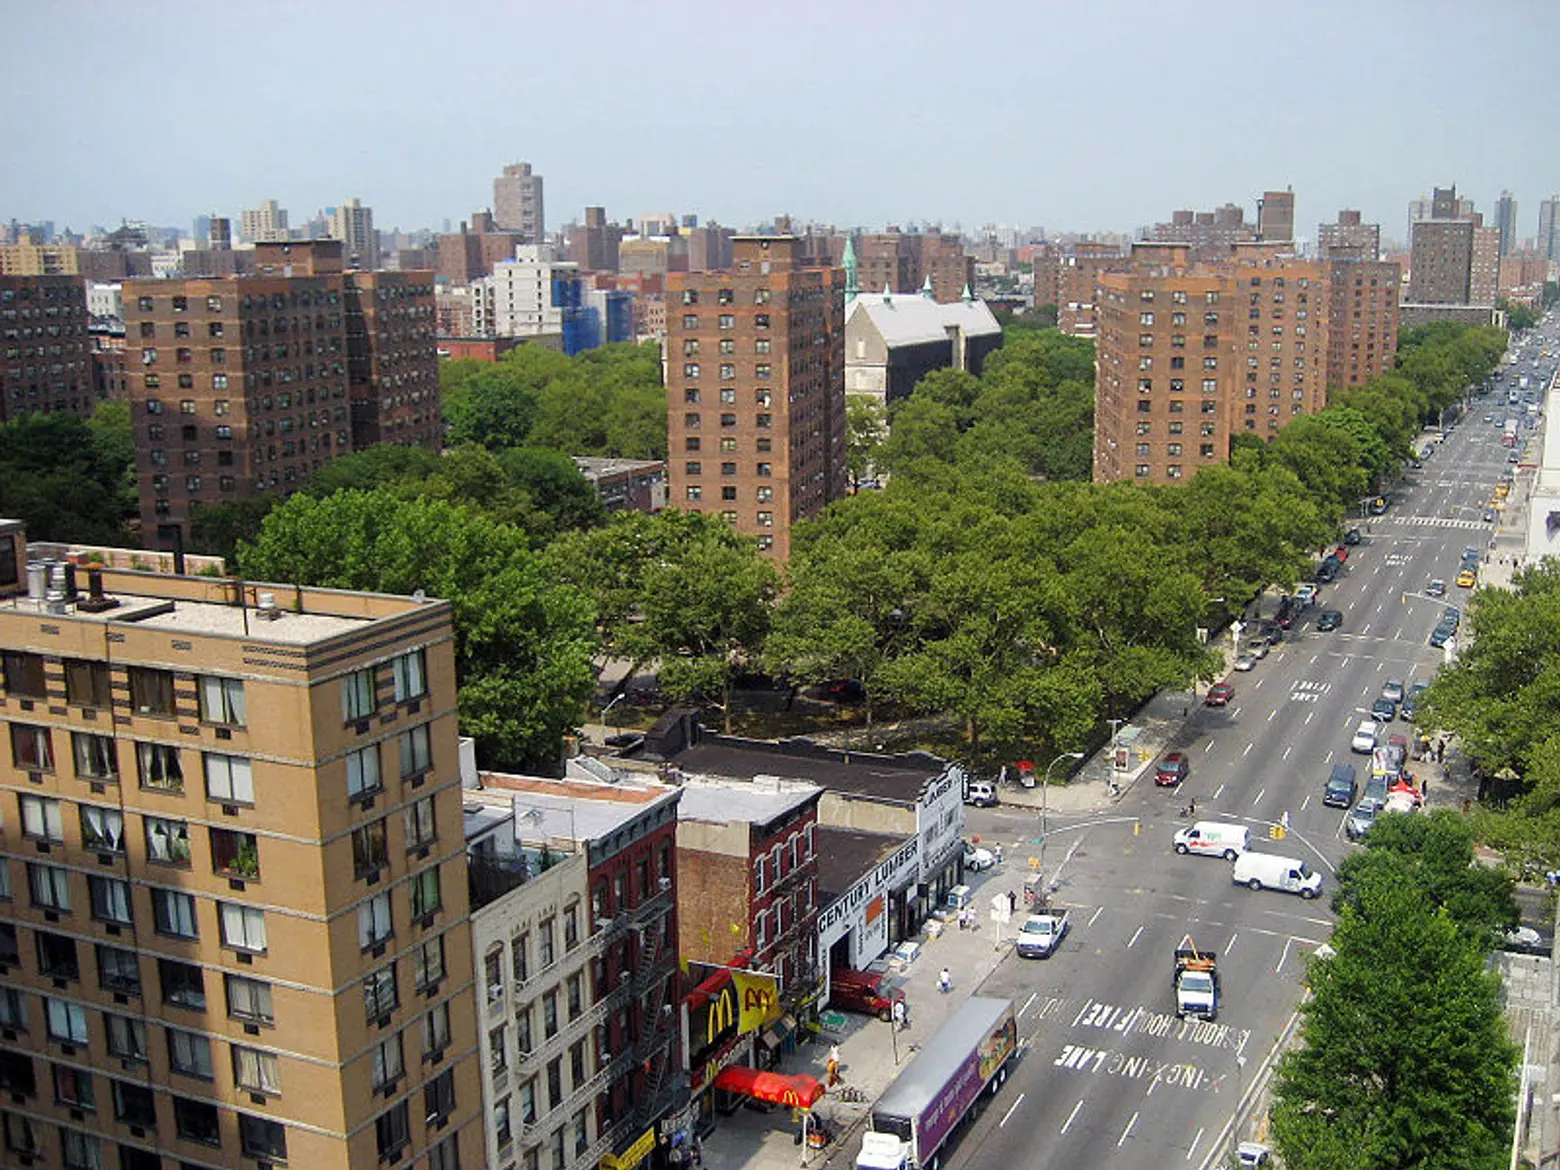 City to develop 2,400 new affordable housing units in East Harlem